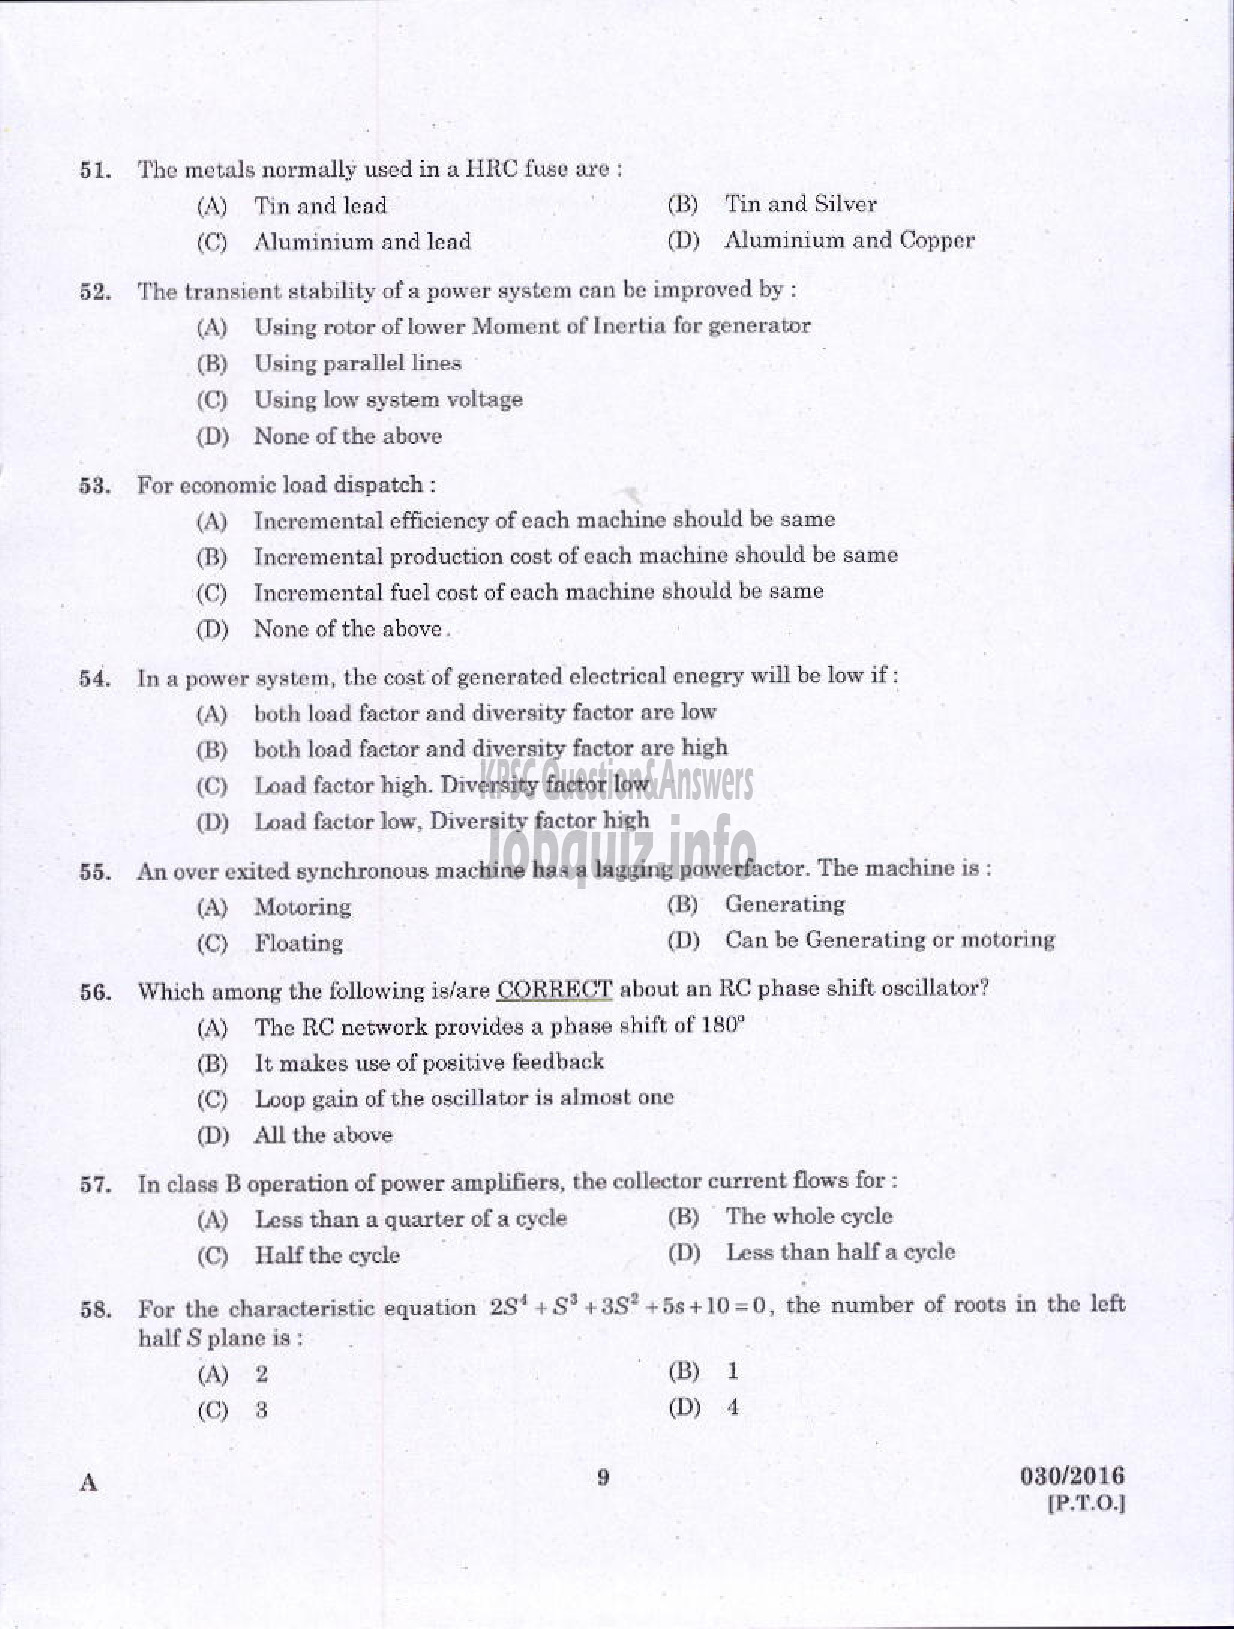 Kerala PSC Question Paper - ASSISTANT ENGINEER ELECTRICAL HARBOUR ENGINEERING-7